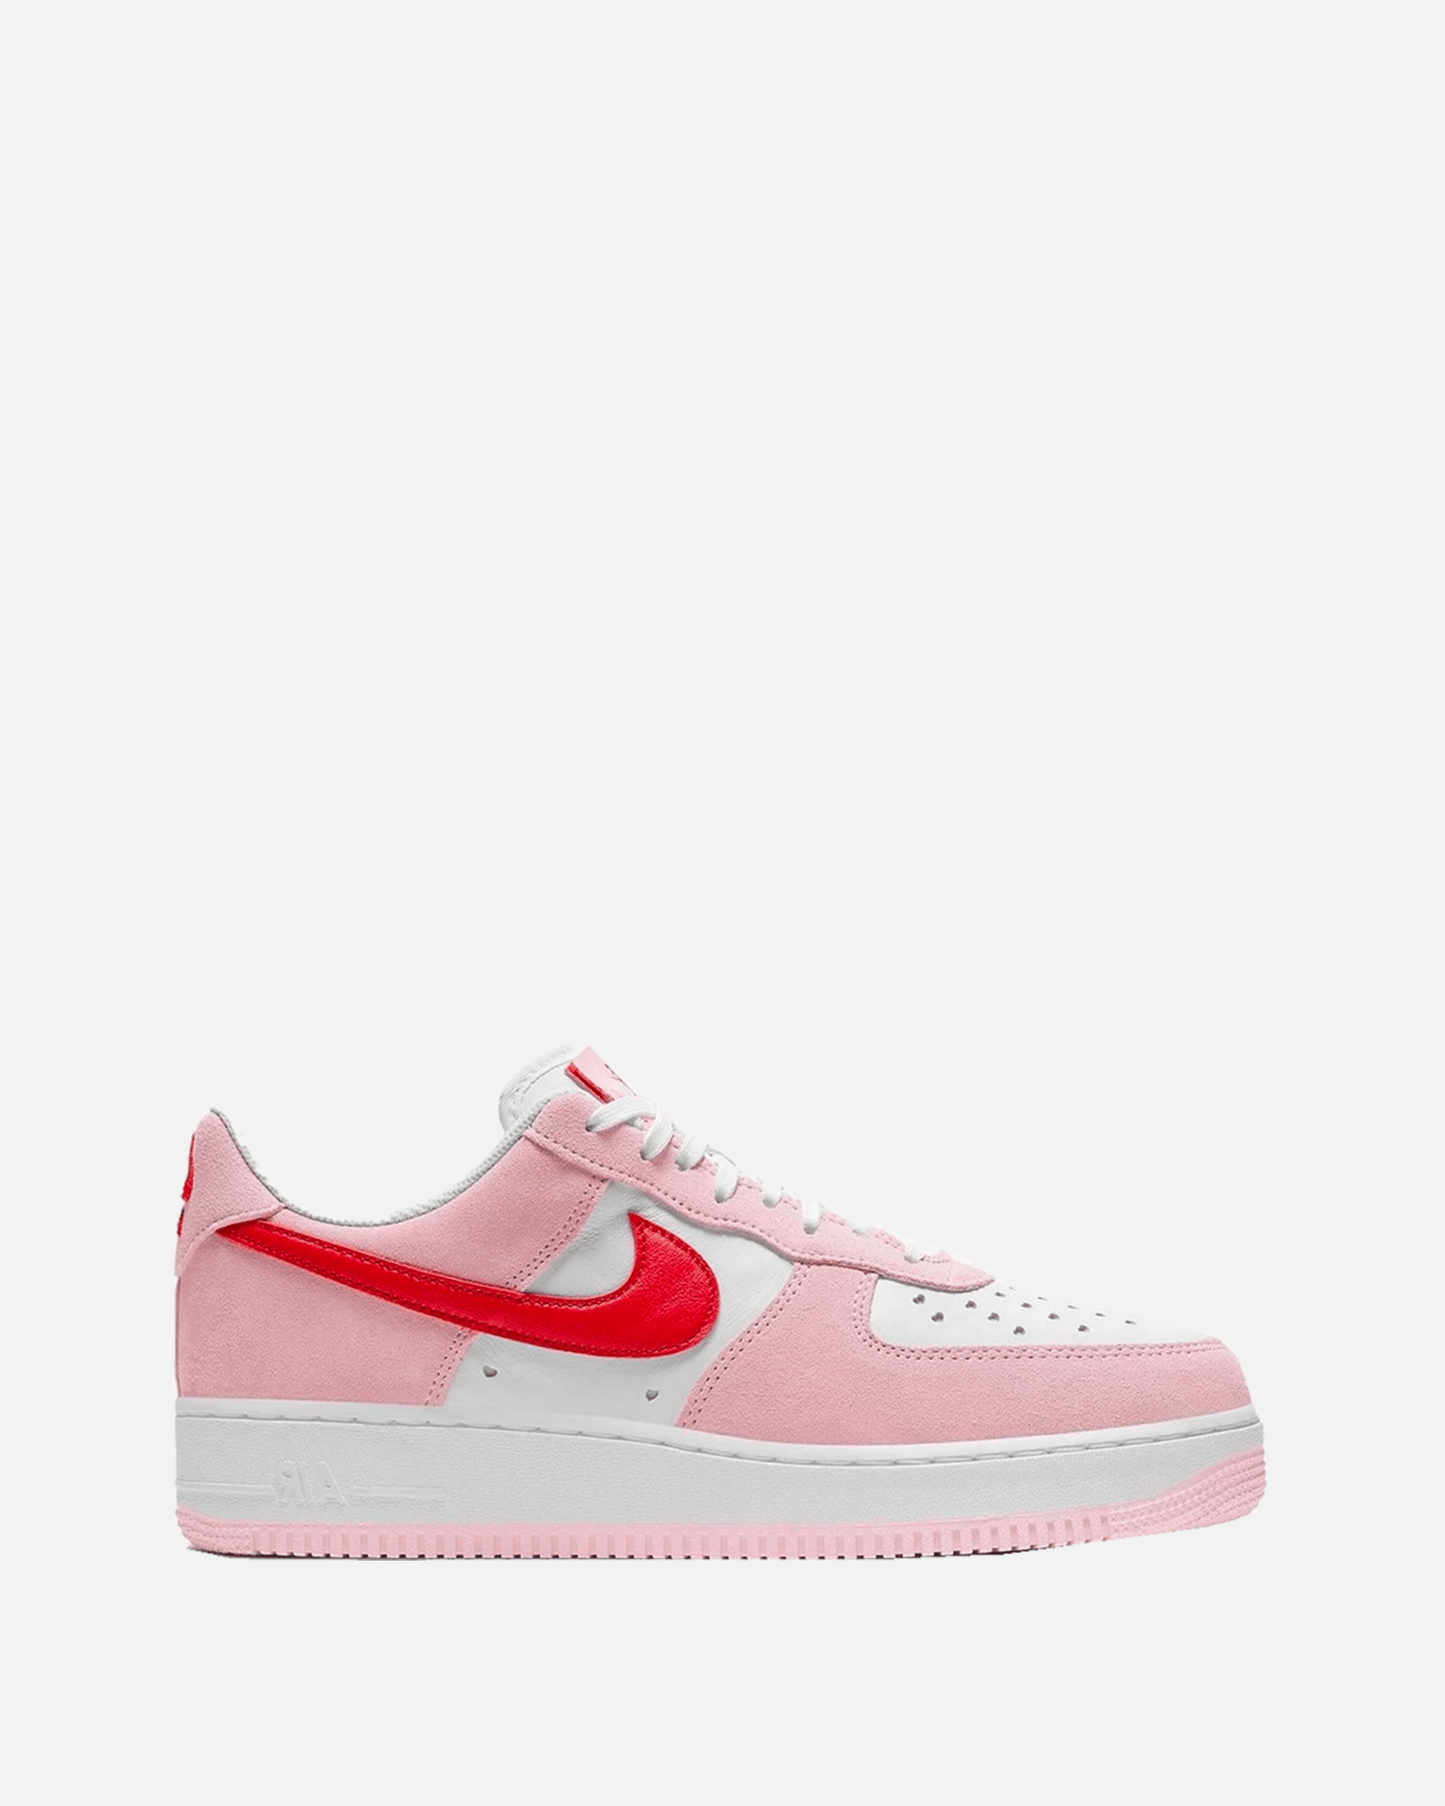 SVRN Men's Sneakers Air Force 1 '07 'Love Letter'